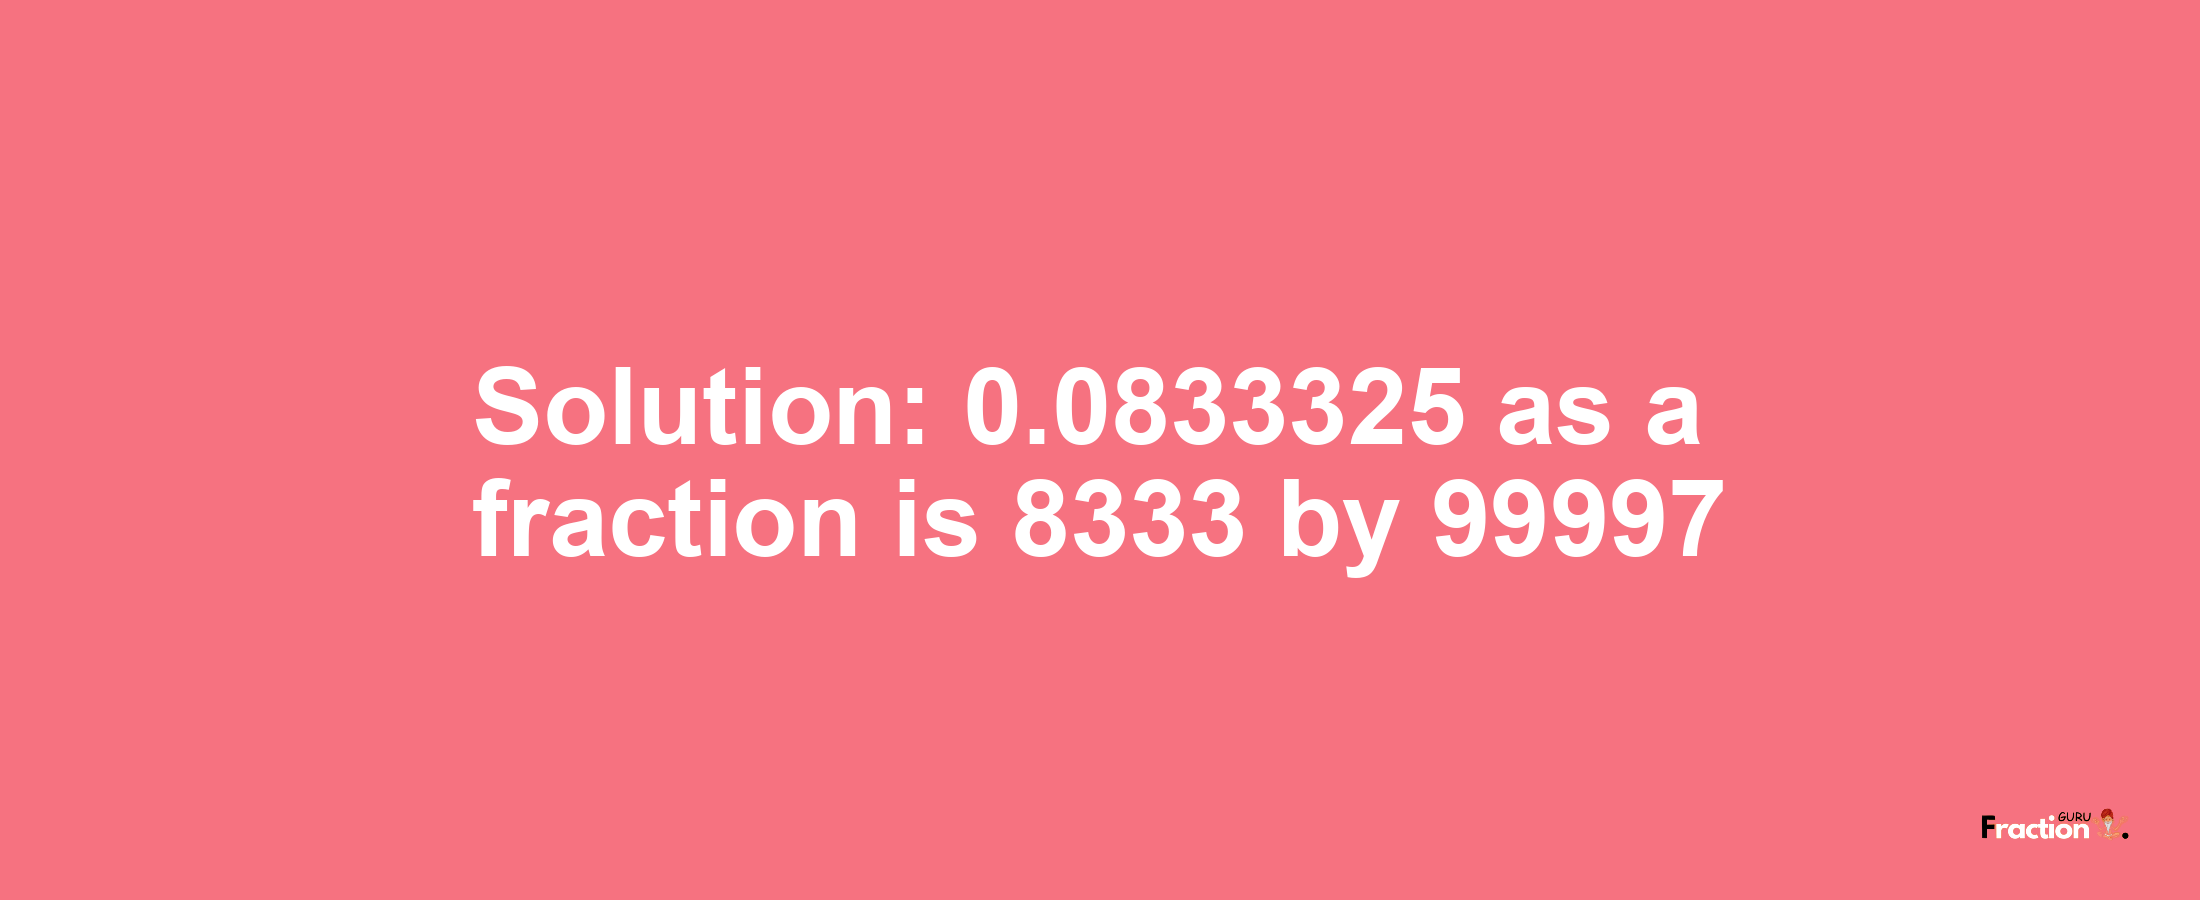 Solution:0.0833325 as a fraction is 8333/99997